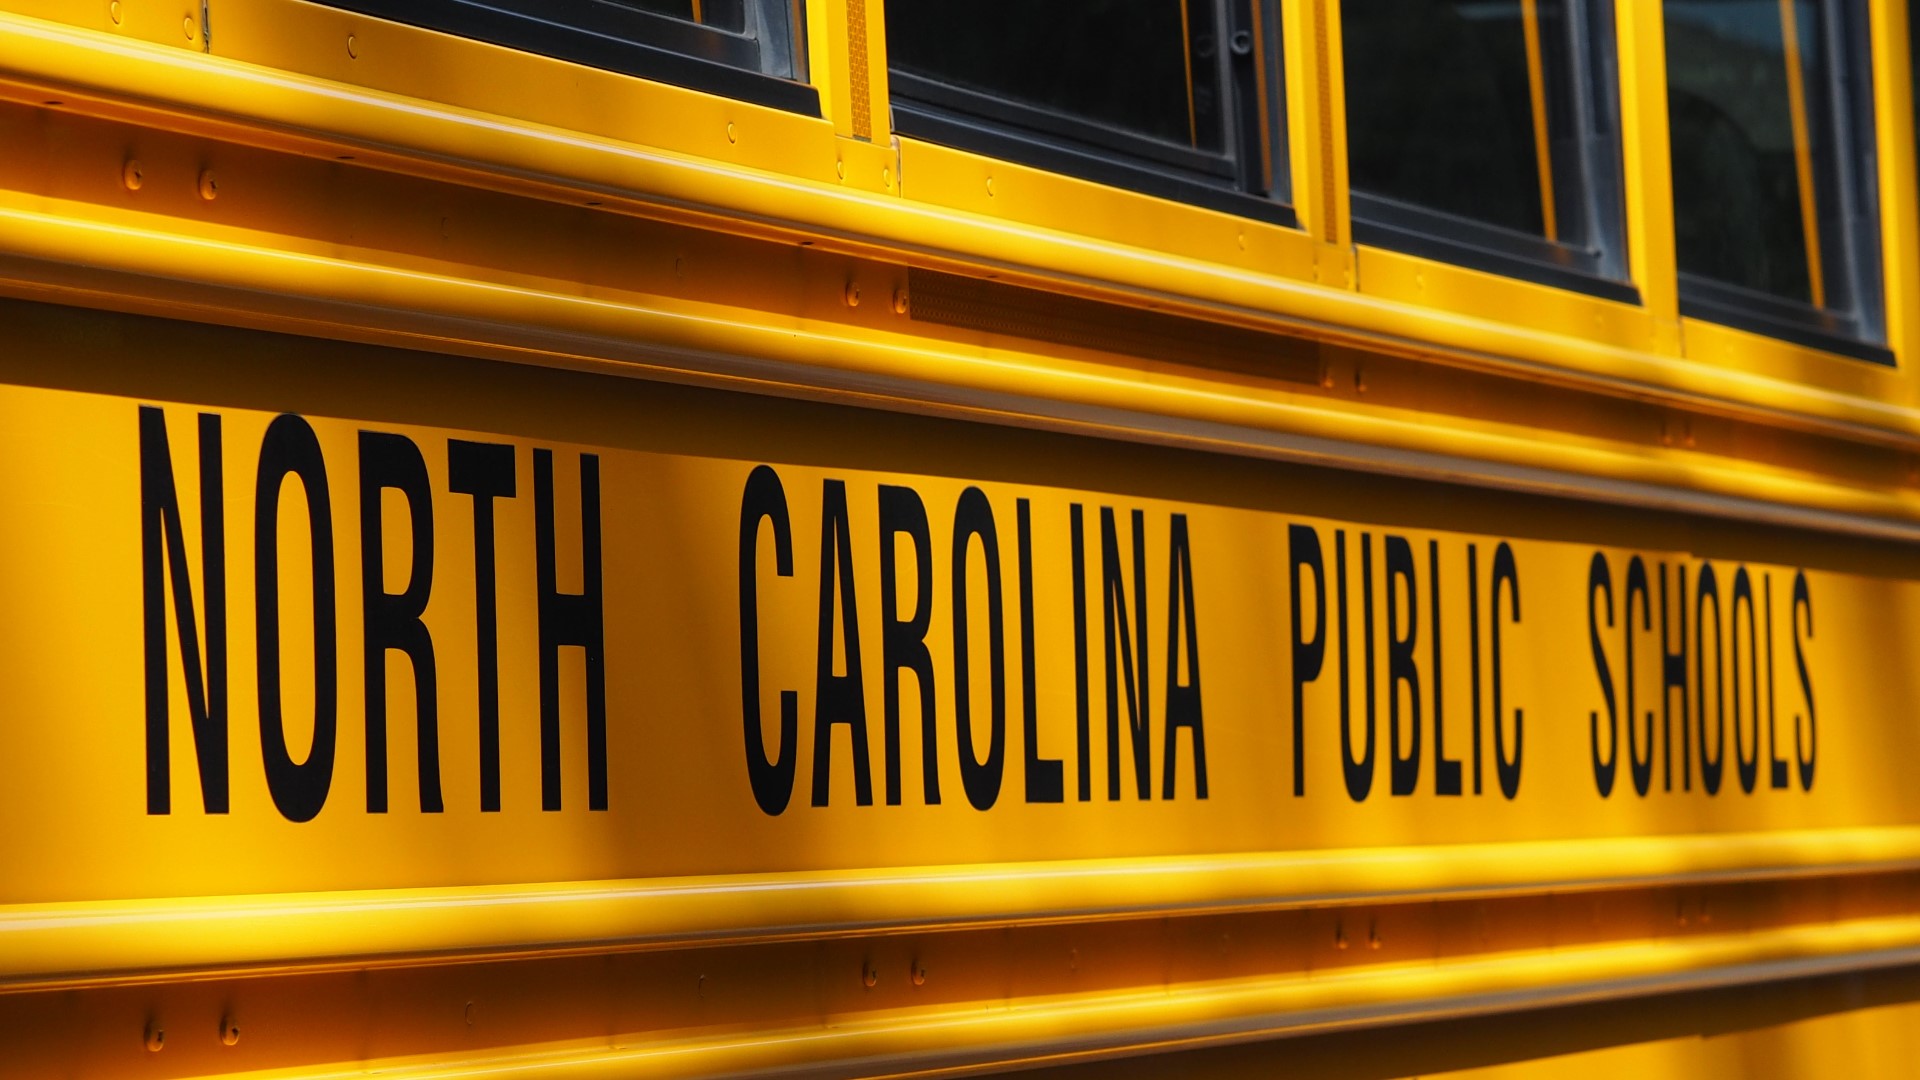 cms-bus-drivers-to-receive-starting-pay-of-15-75-an-hour-wtsp